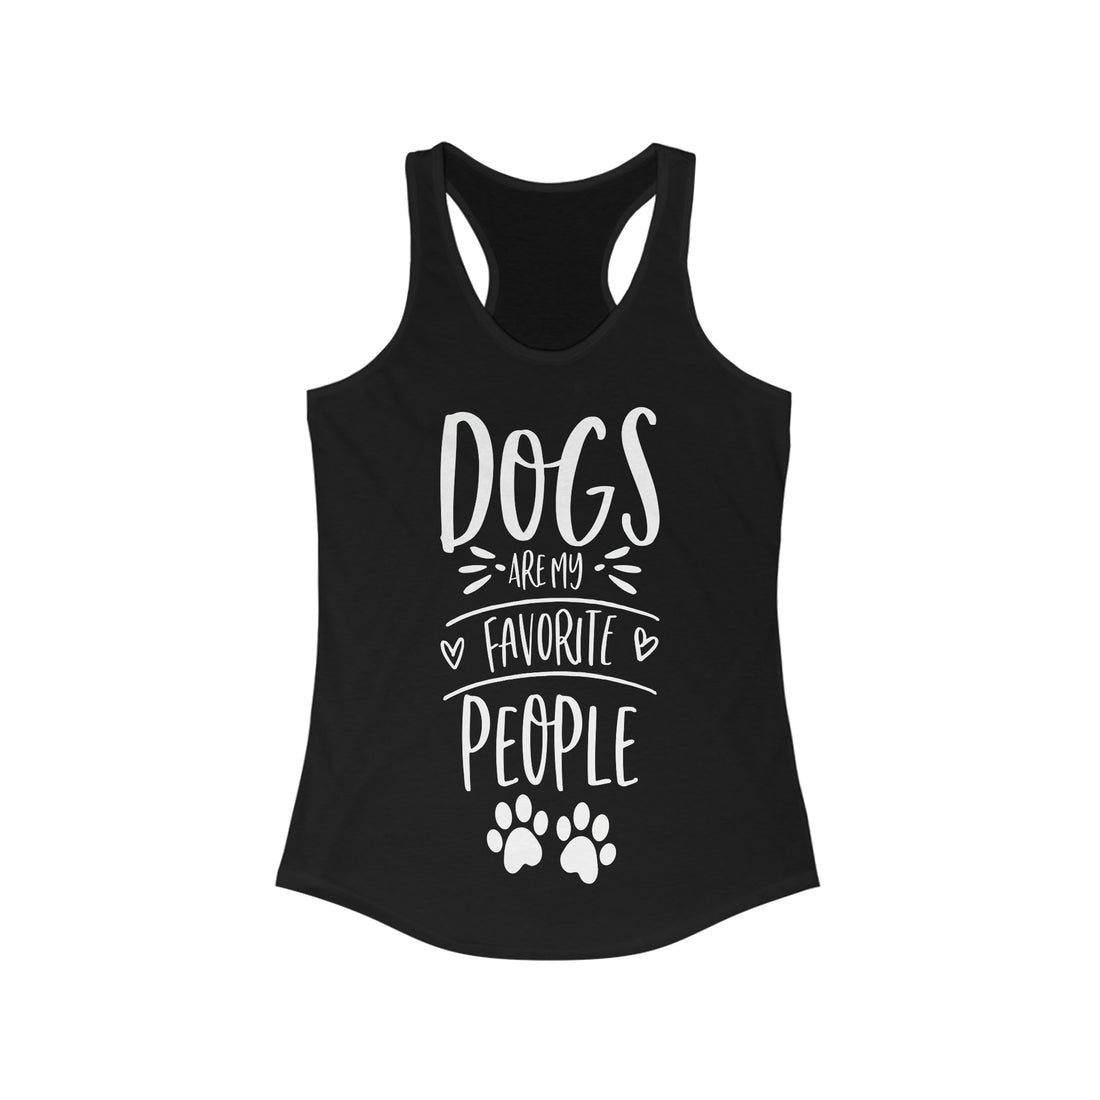 Dogs Are My Favorite People - Racerback Tank Top